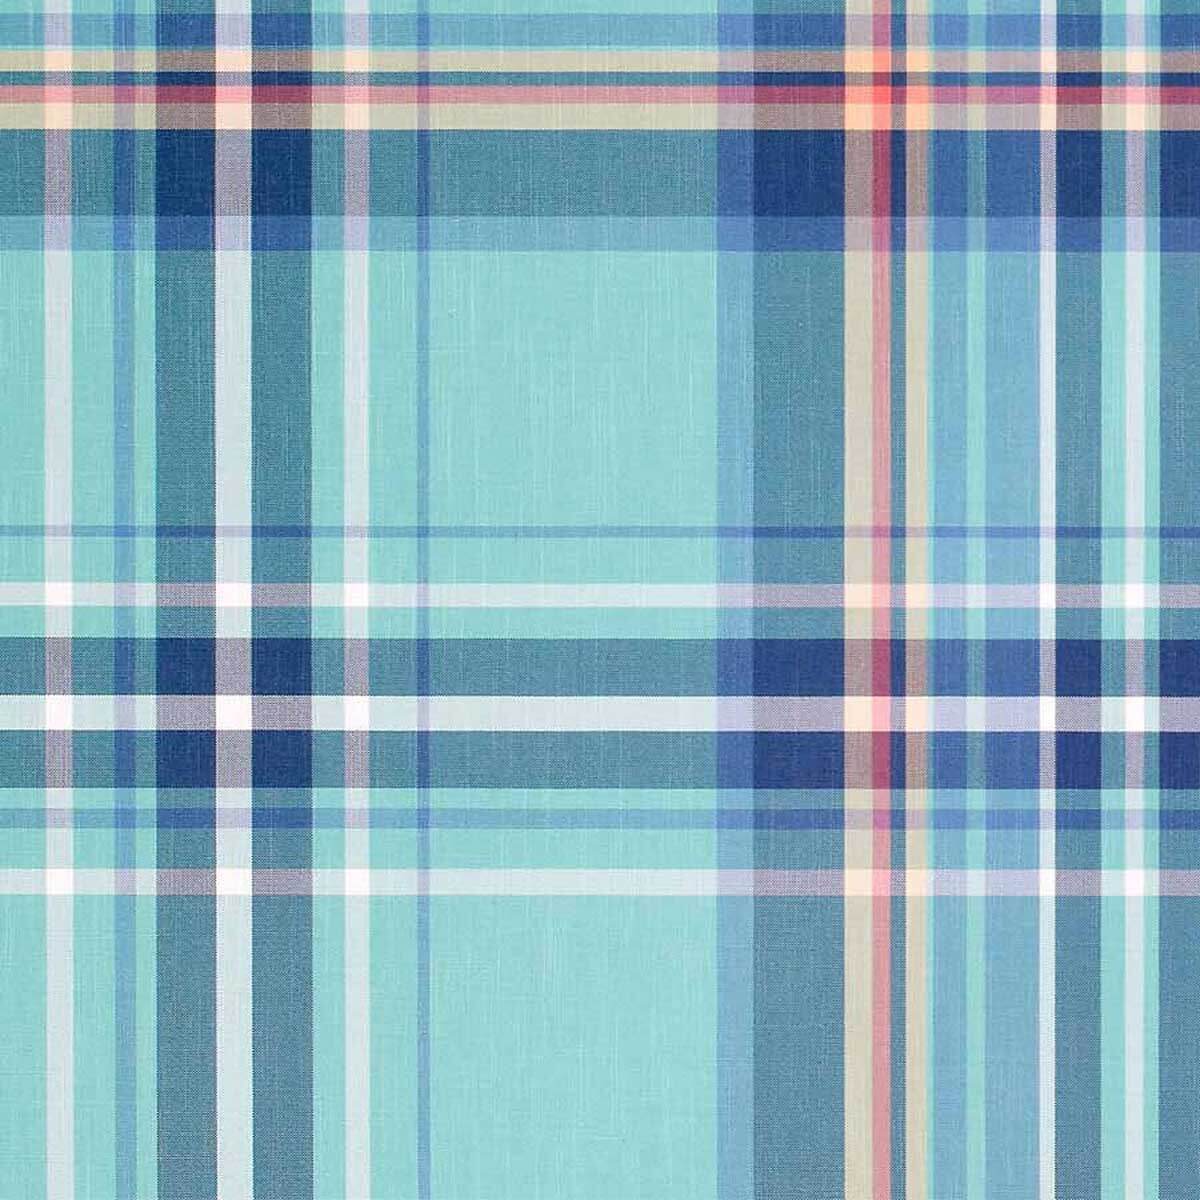 Preppy Blue Wallpaper APK for Android Download